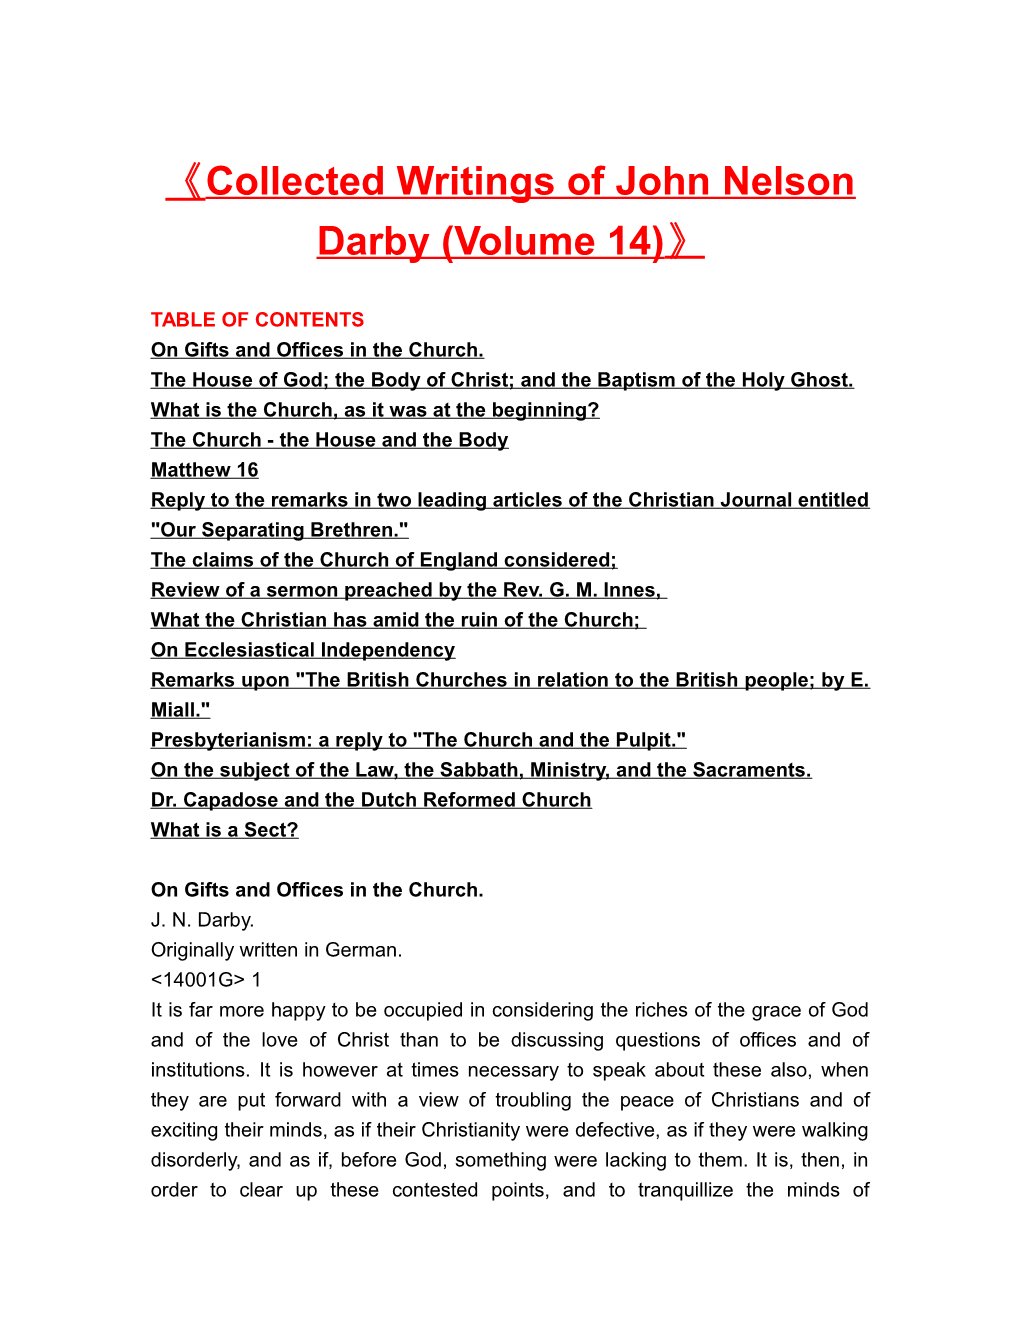 Collected Writings of John Nelson Darby (Volume 14)